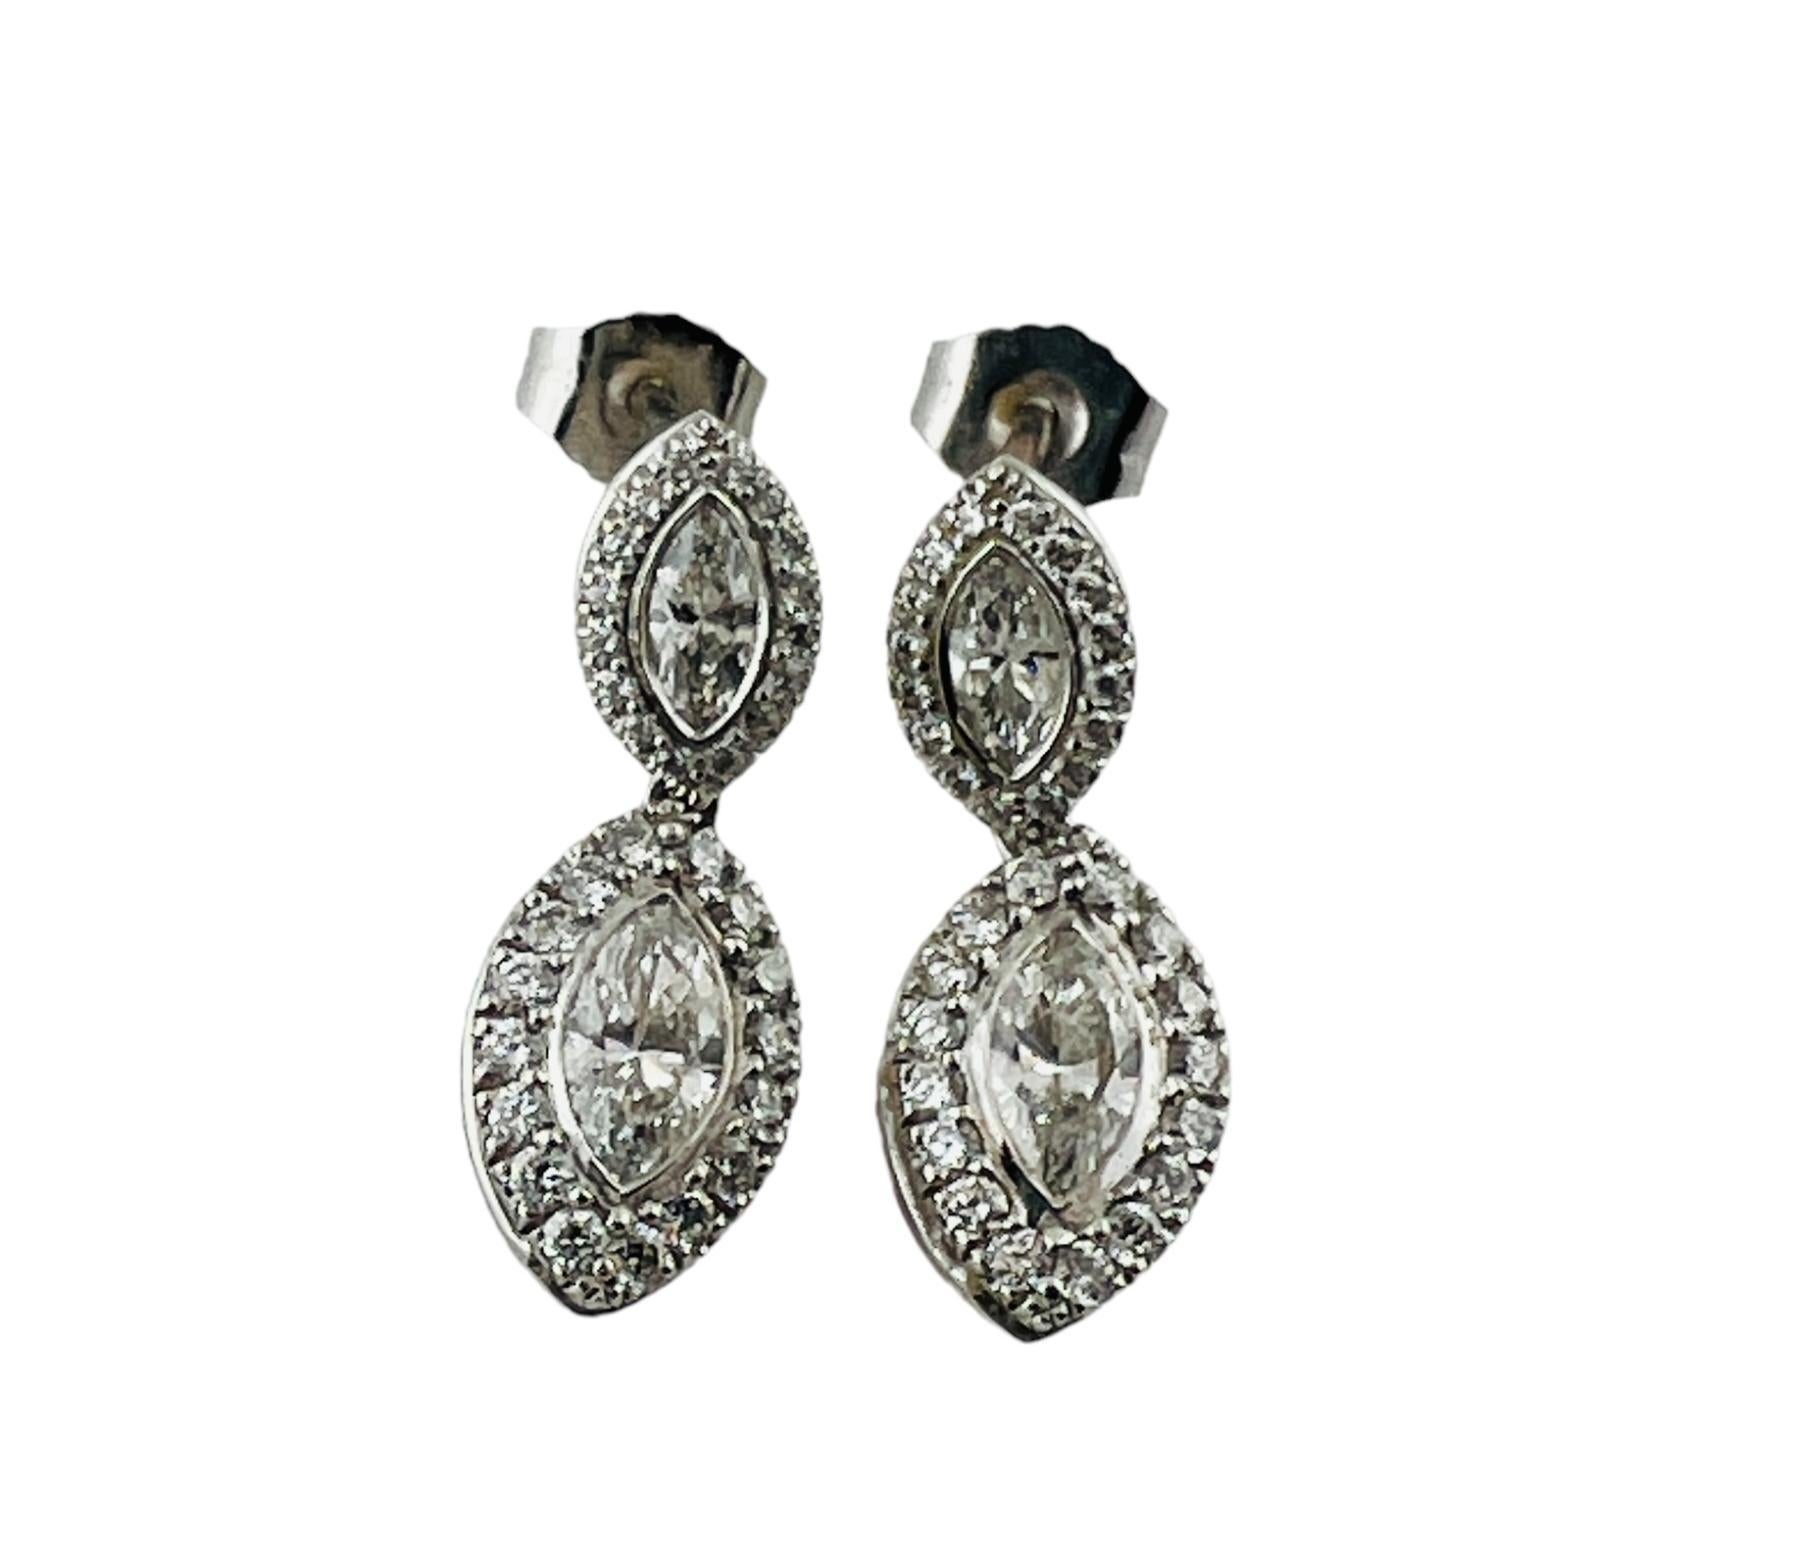 Kwait Platinum and Diamond Dangle Earrings

These stunning dangle earrings each feature one marquis diamond and 32 round brilliant cut diamonds set in 18K white gold with platinum posts.  

Push back closures.

Approximate total diamond weight: 